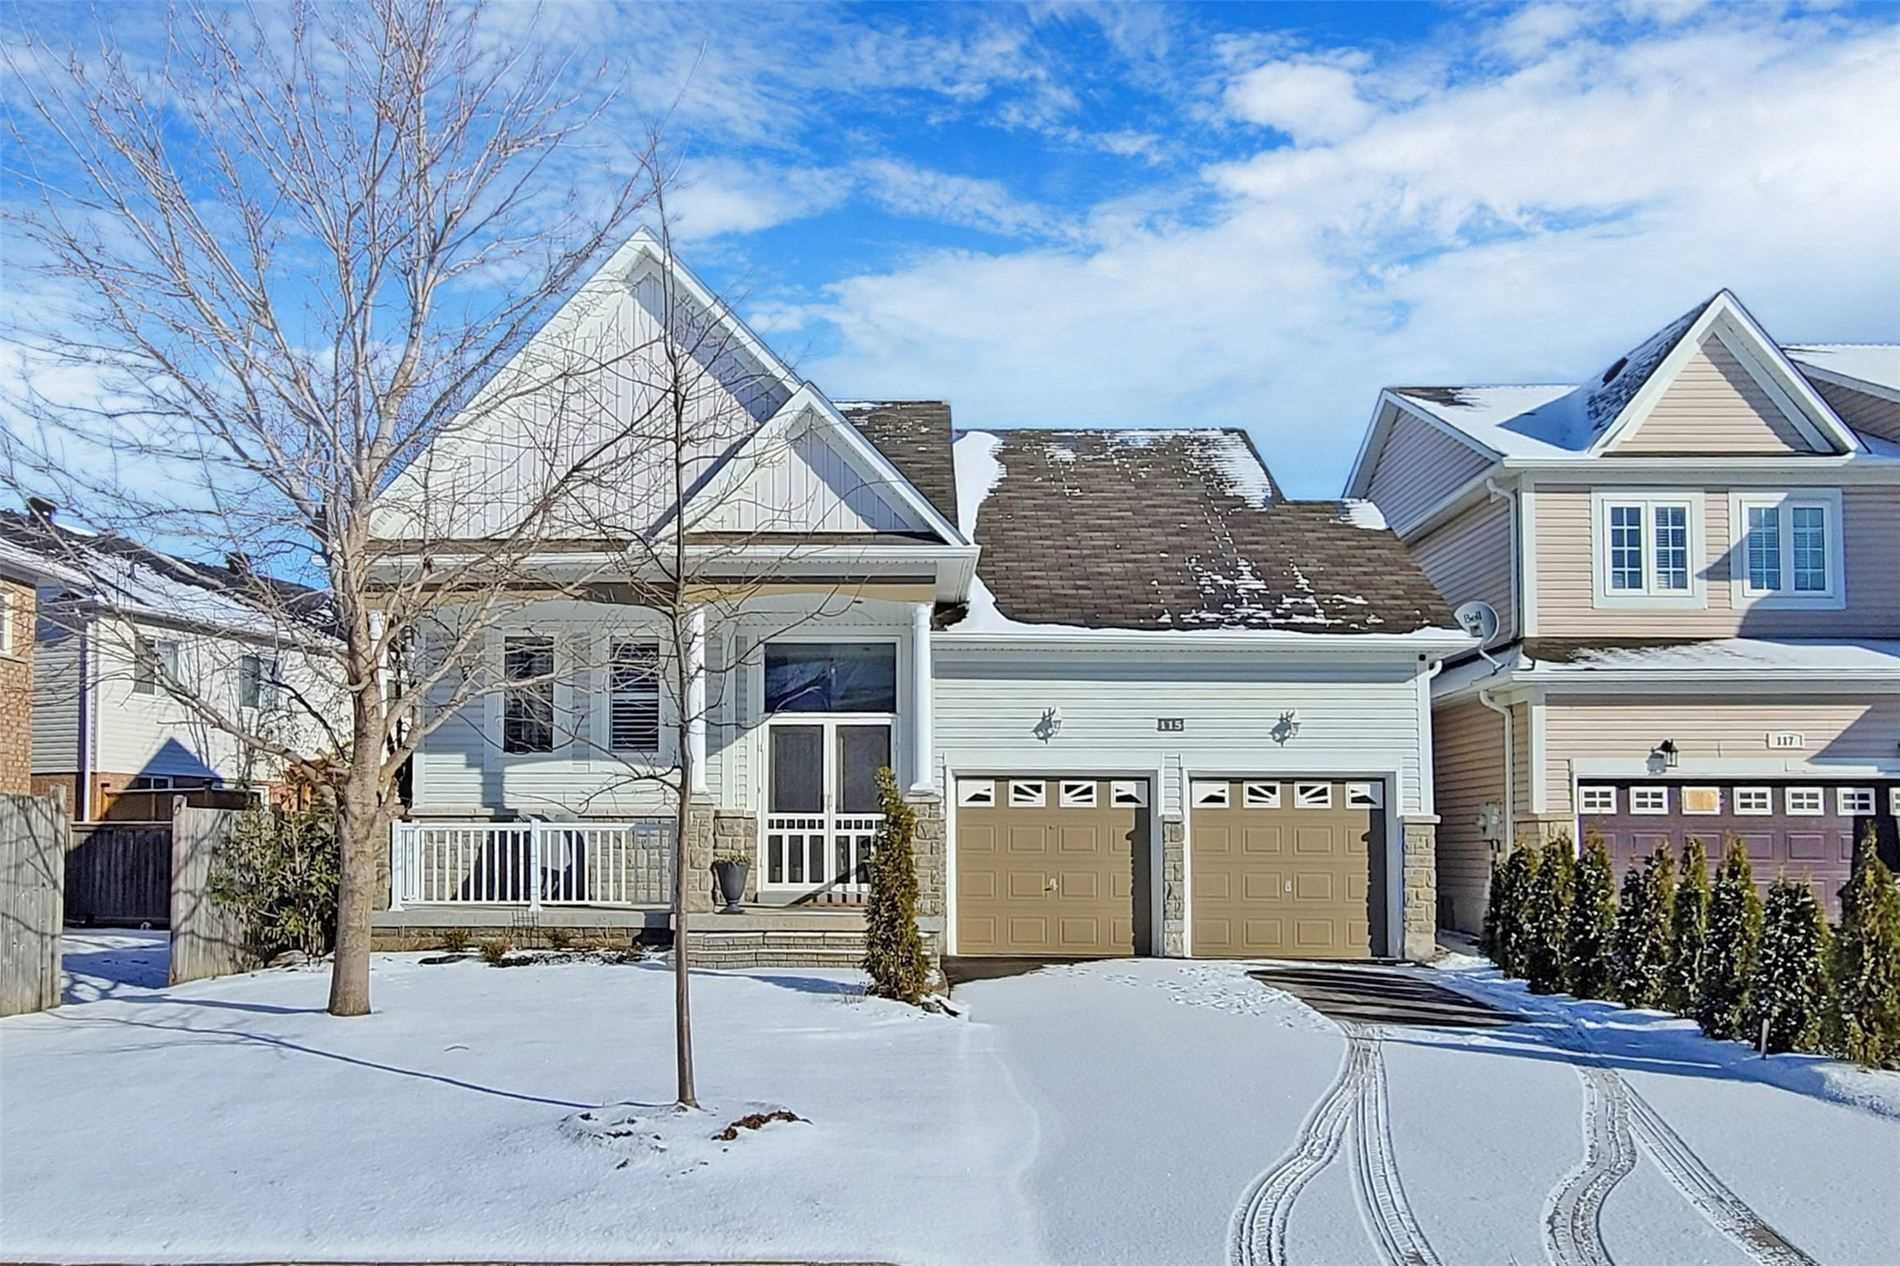 New property listed in Innis-Shore, Barrie